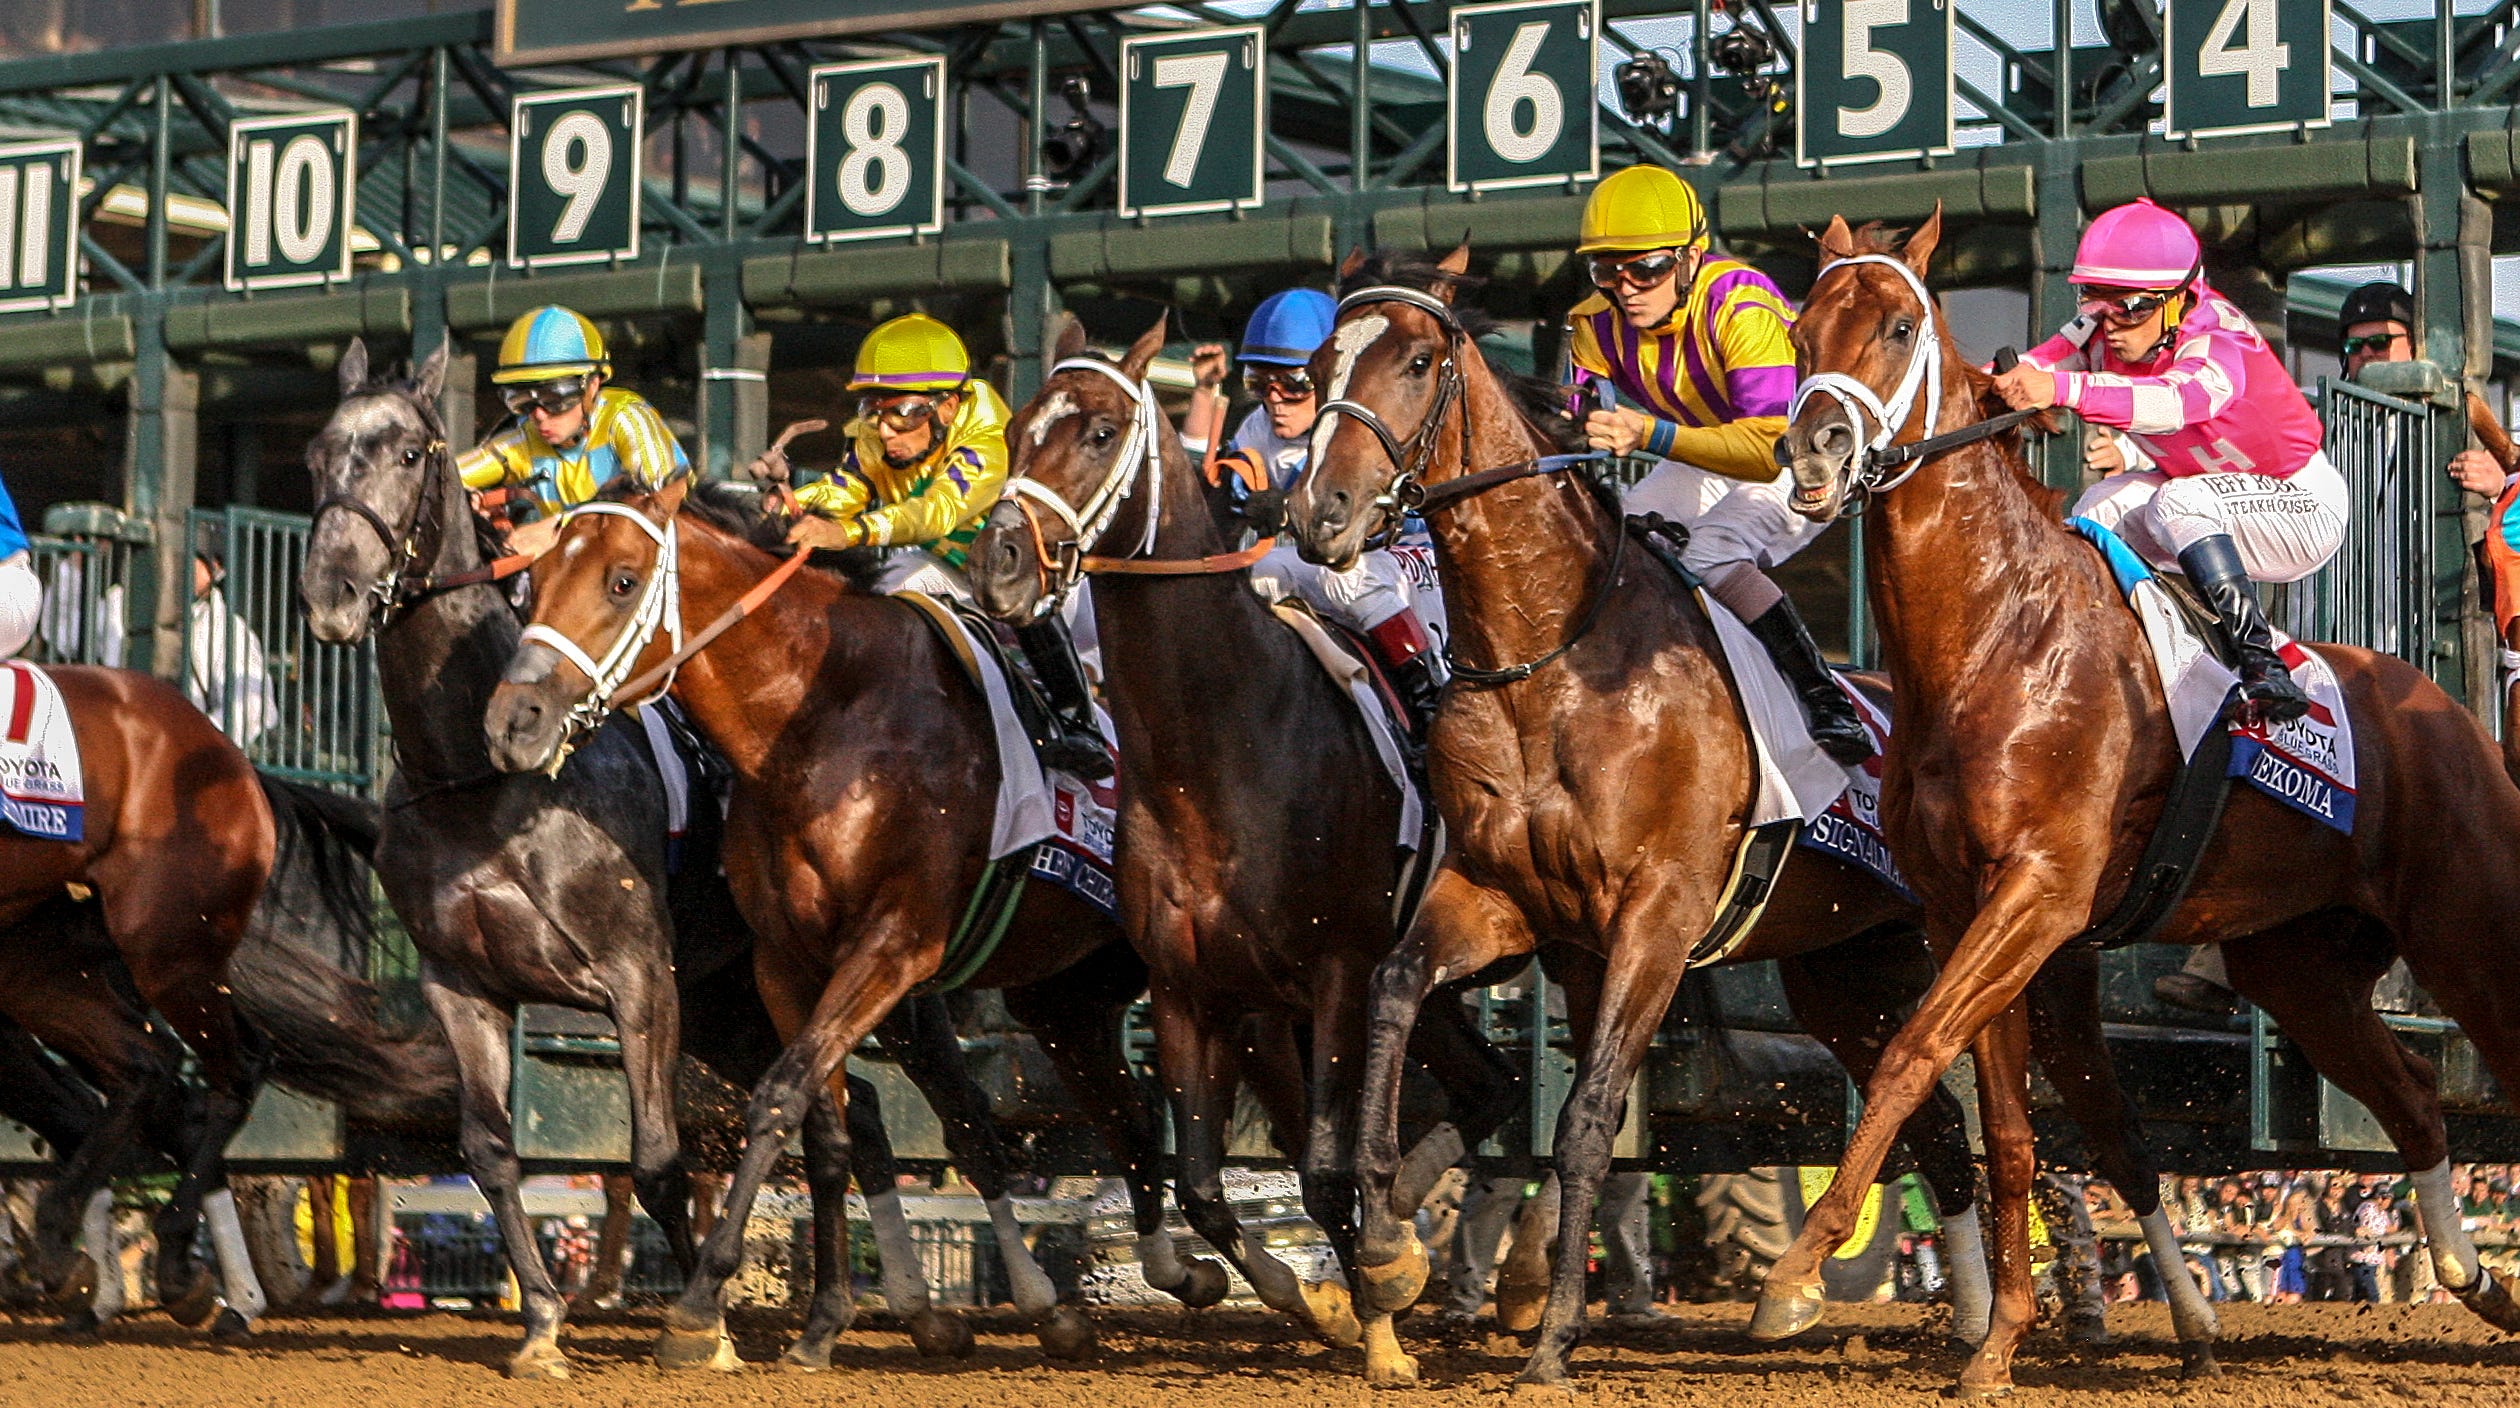 Horse racing is the most dangerous sport for concussions